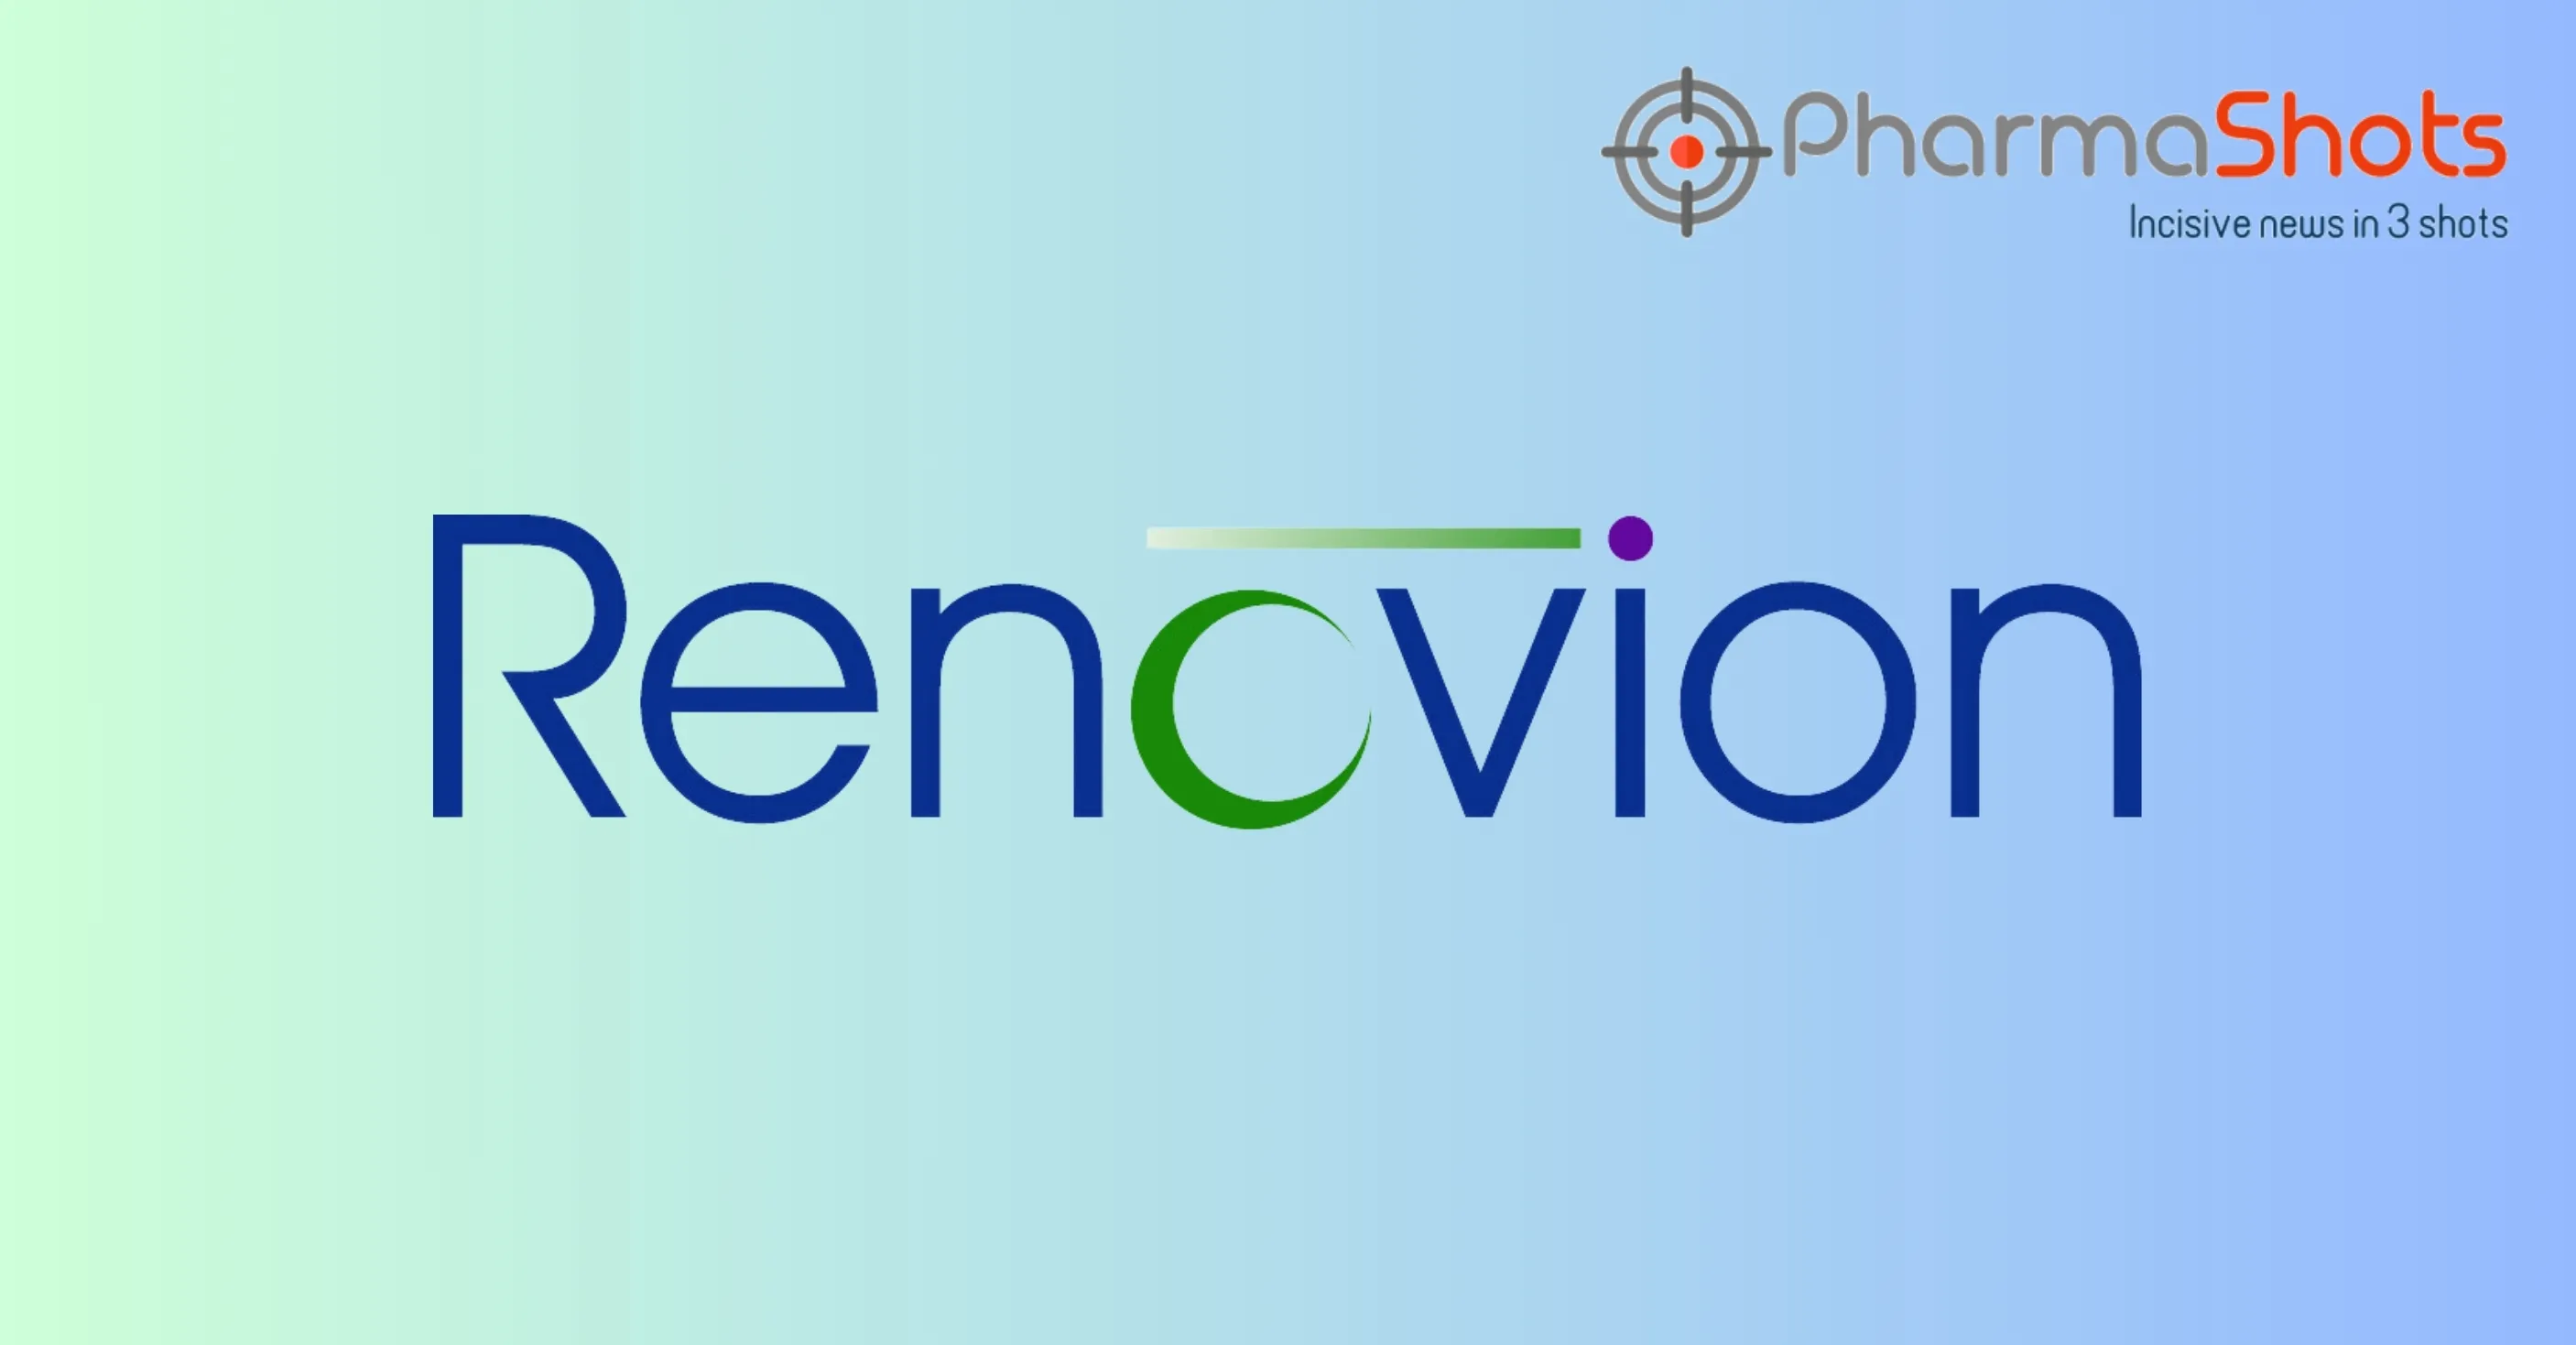 Renovion Concludes Patient Recruitment in the P-II (CLIMB) Trial of ARINA-1 for Bronchiectasis